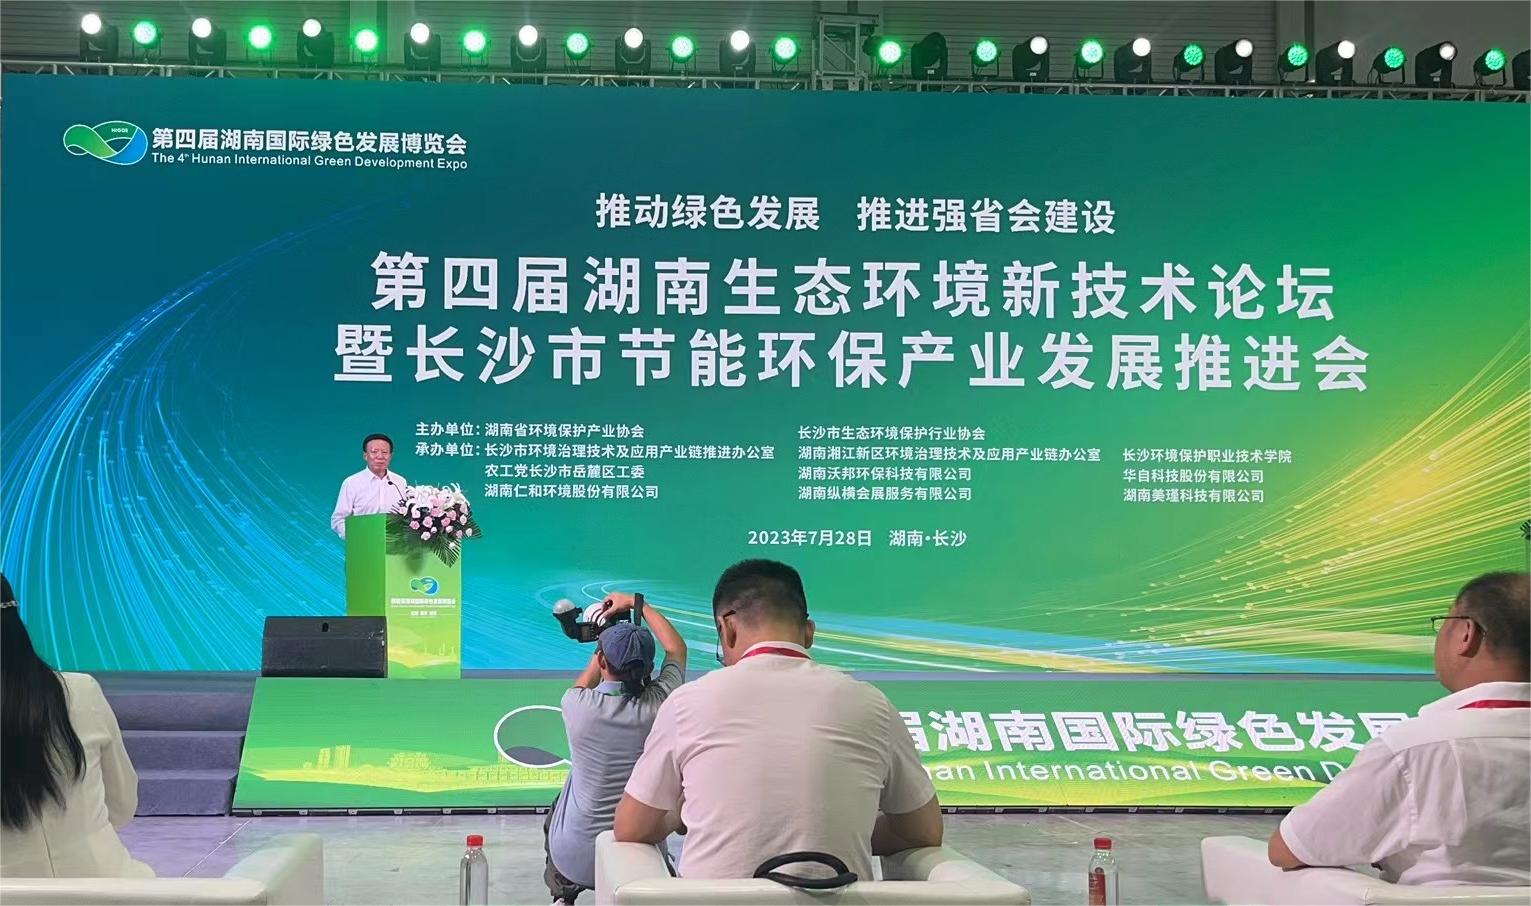 Xintan is invited to participate in The 4th Hunan International Green Development Expo